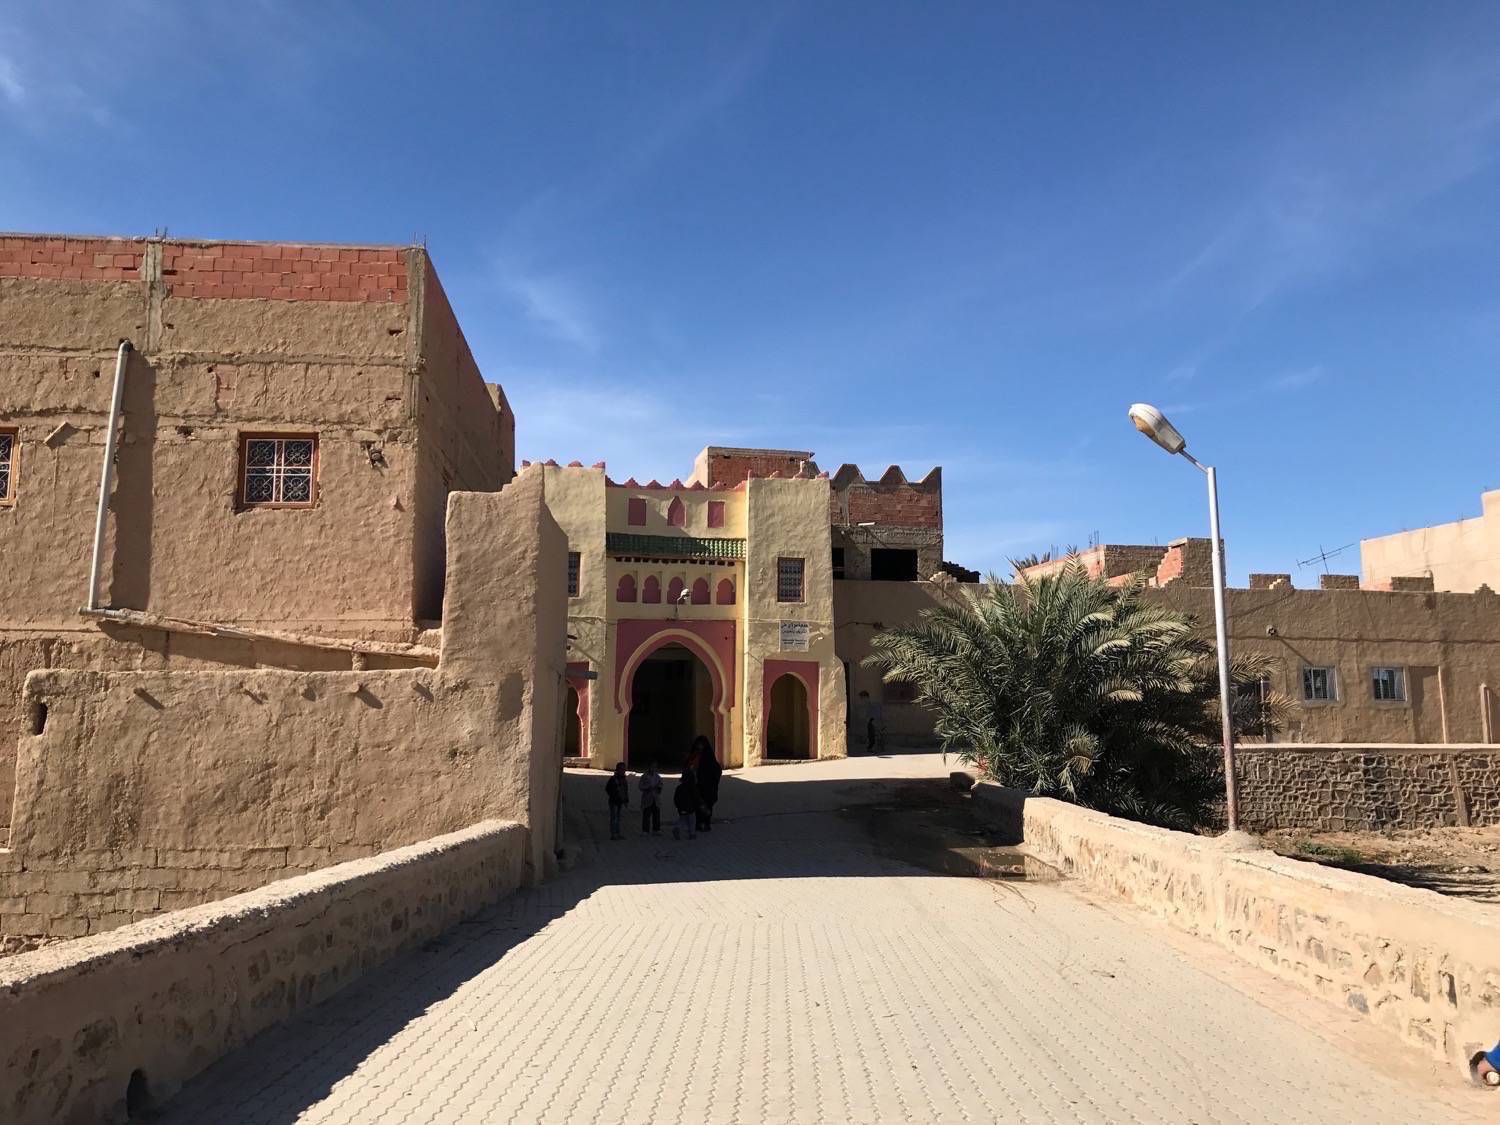 Ksar Rissani - Elevated passageway leading to one of the main entrances to the old Ksar of Rissani